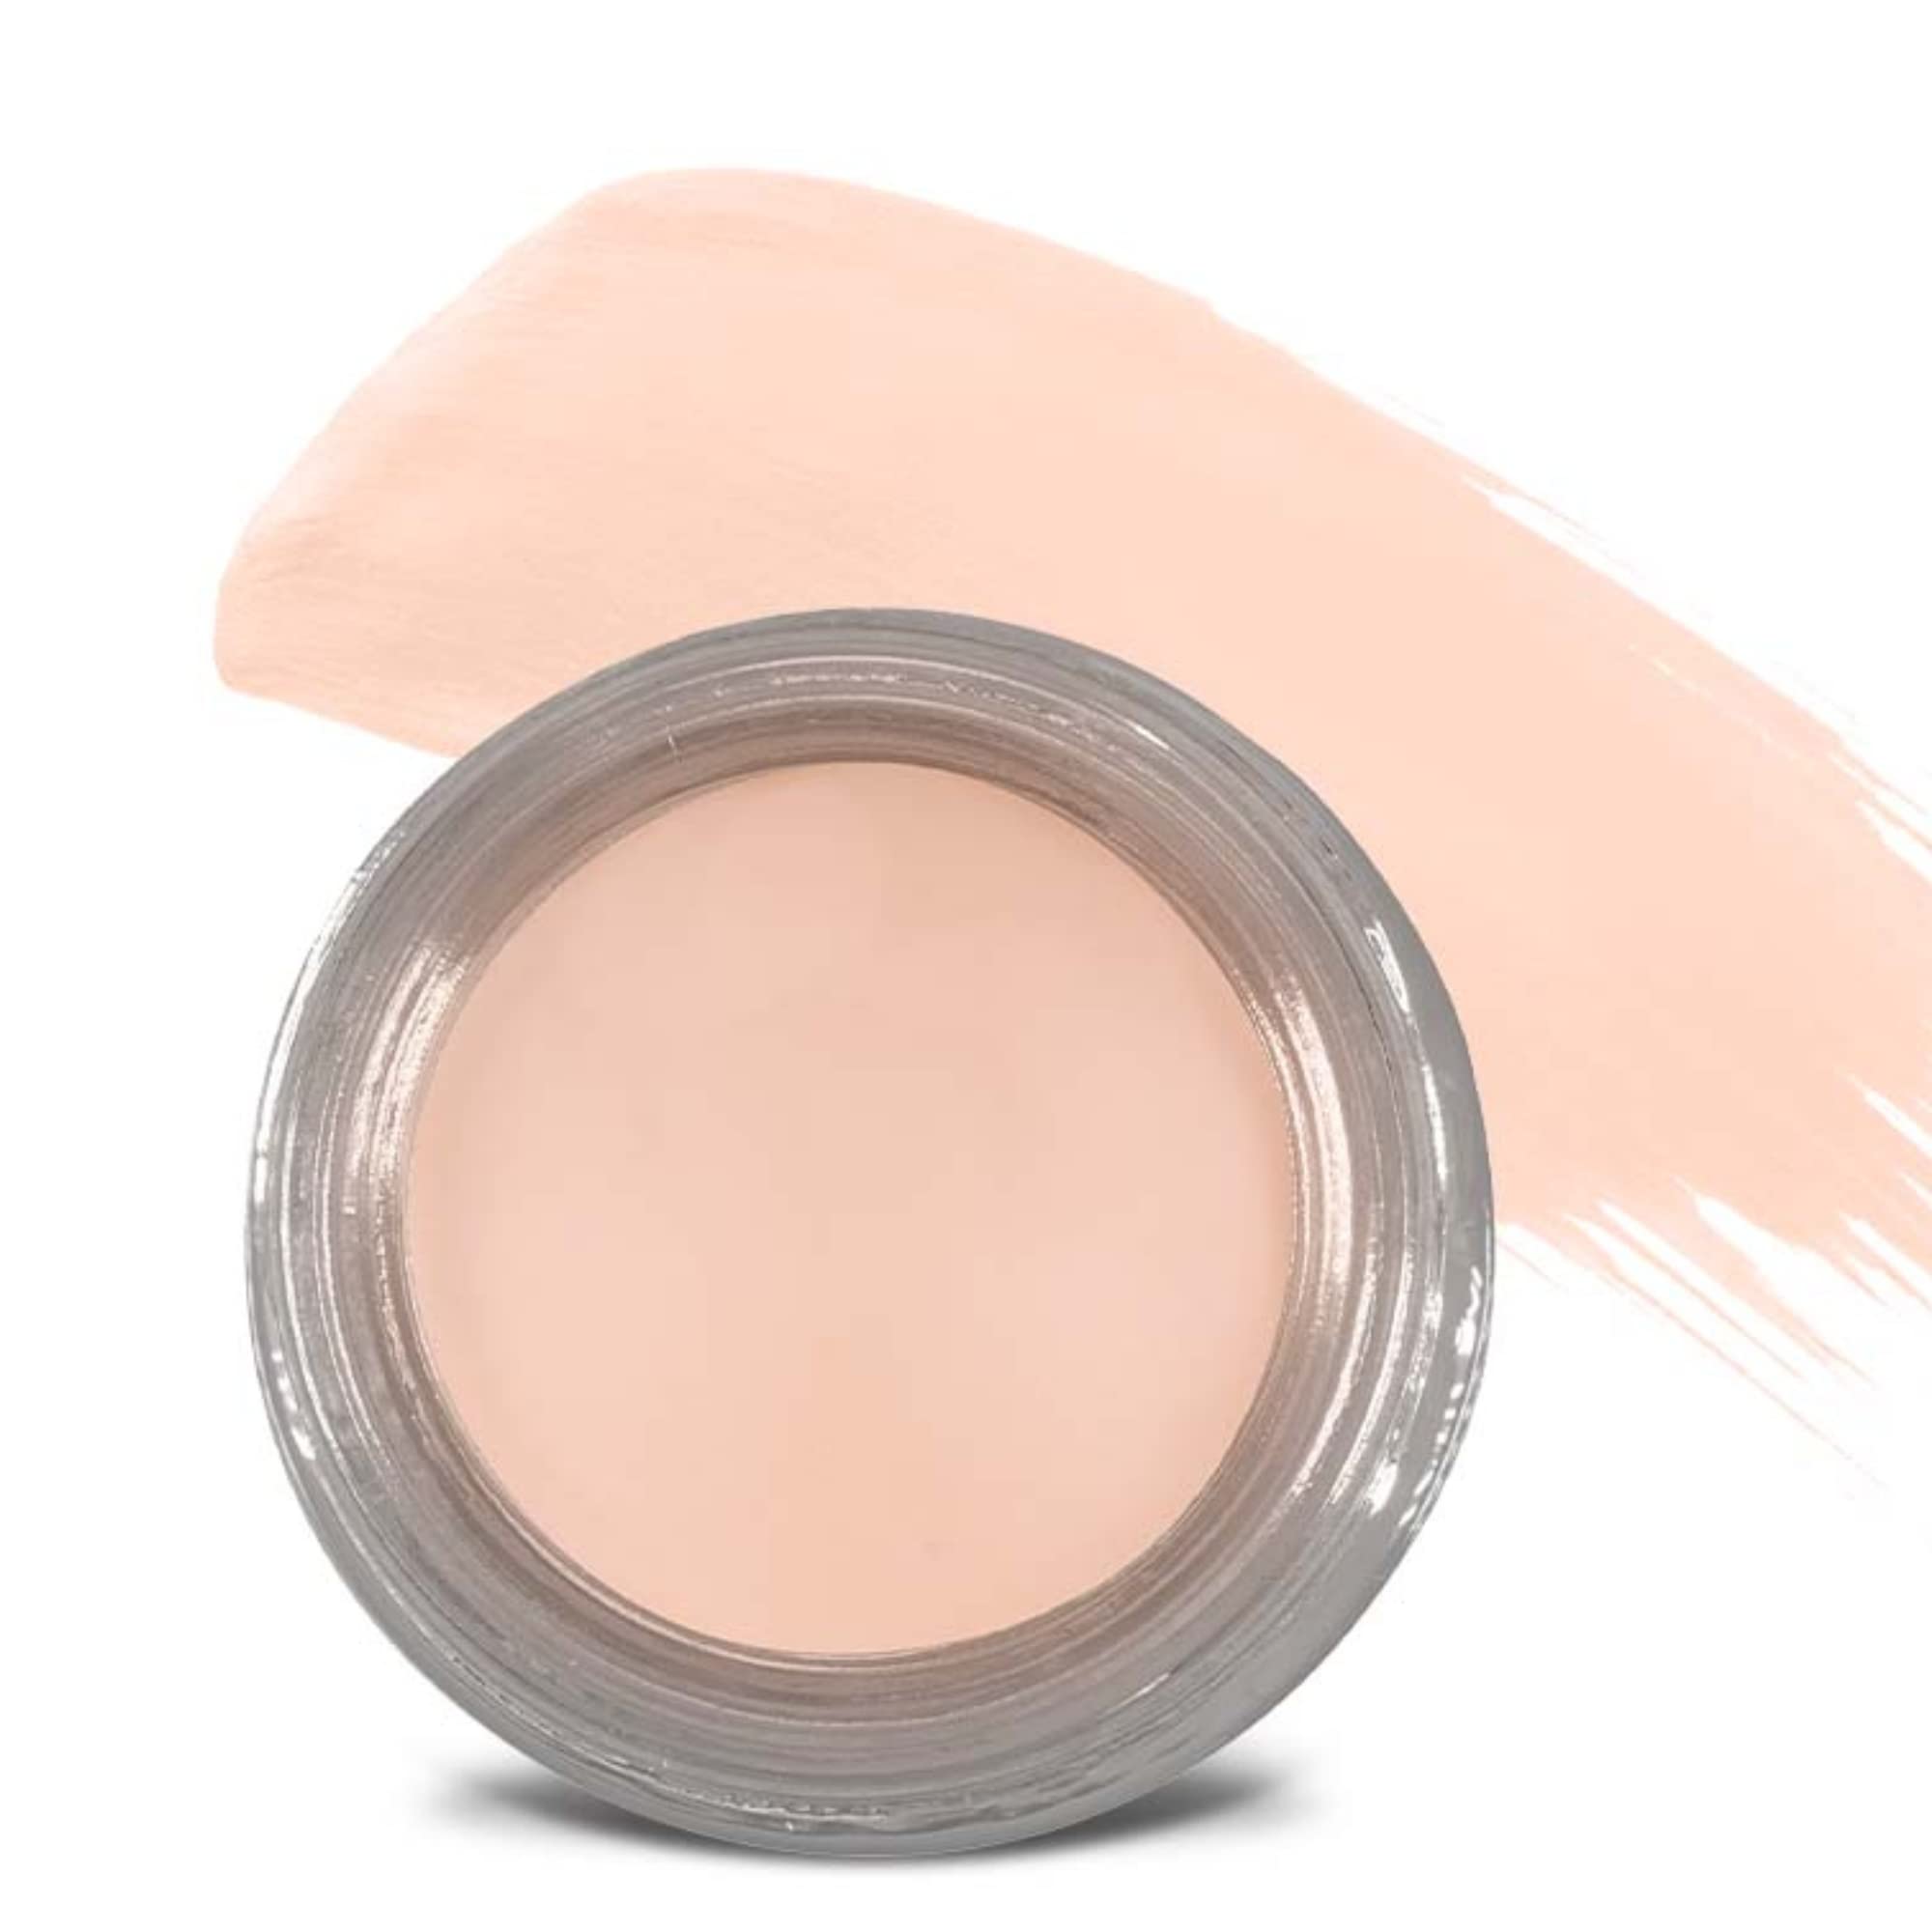 Mommy Makeup Any Wear Creme in Brighten Up (a Warm Matte Cream) - The ultimate multi-tasking cosmetic - Smudge-proof Eye Shadow, Cheek Color, and Lip Color all-in-one [Brighten Up]